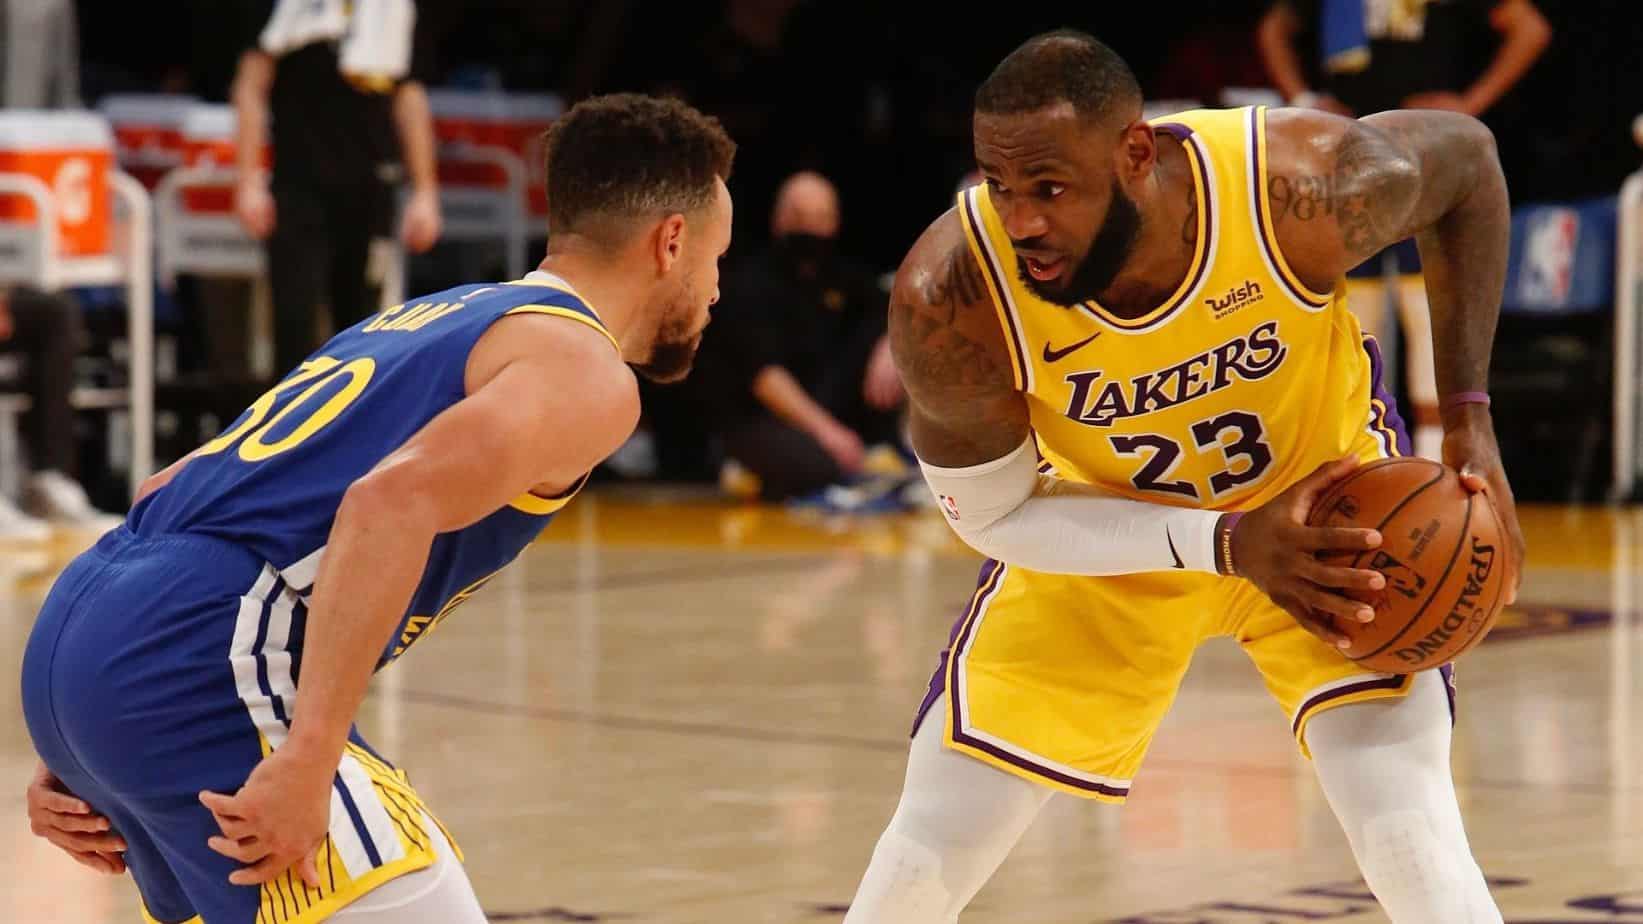 Los Angeles Lakers vs. Golden State Warriors: Duel for a Playoff Spot